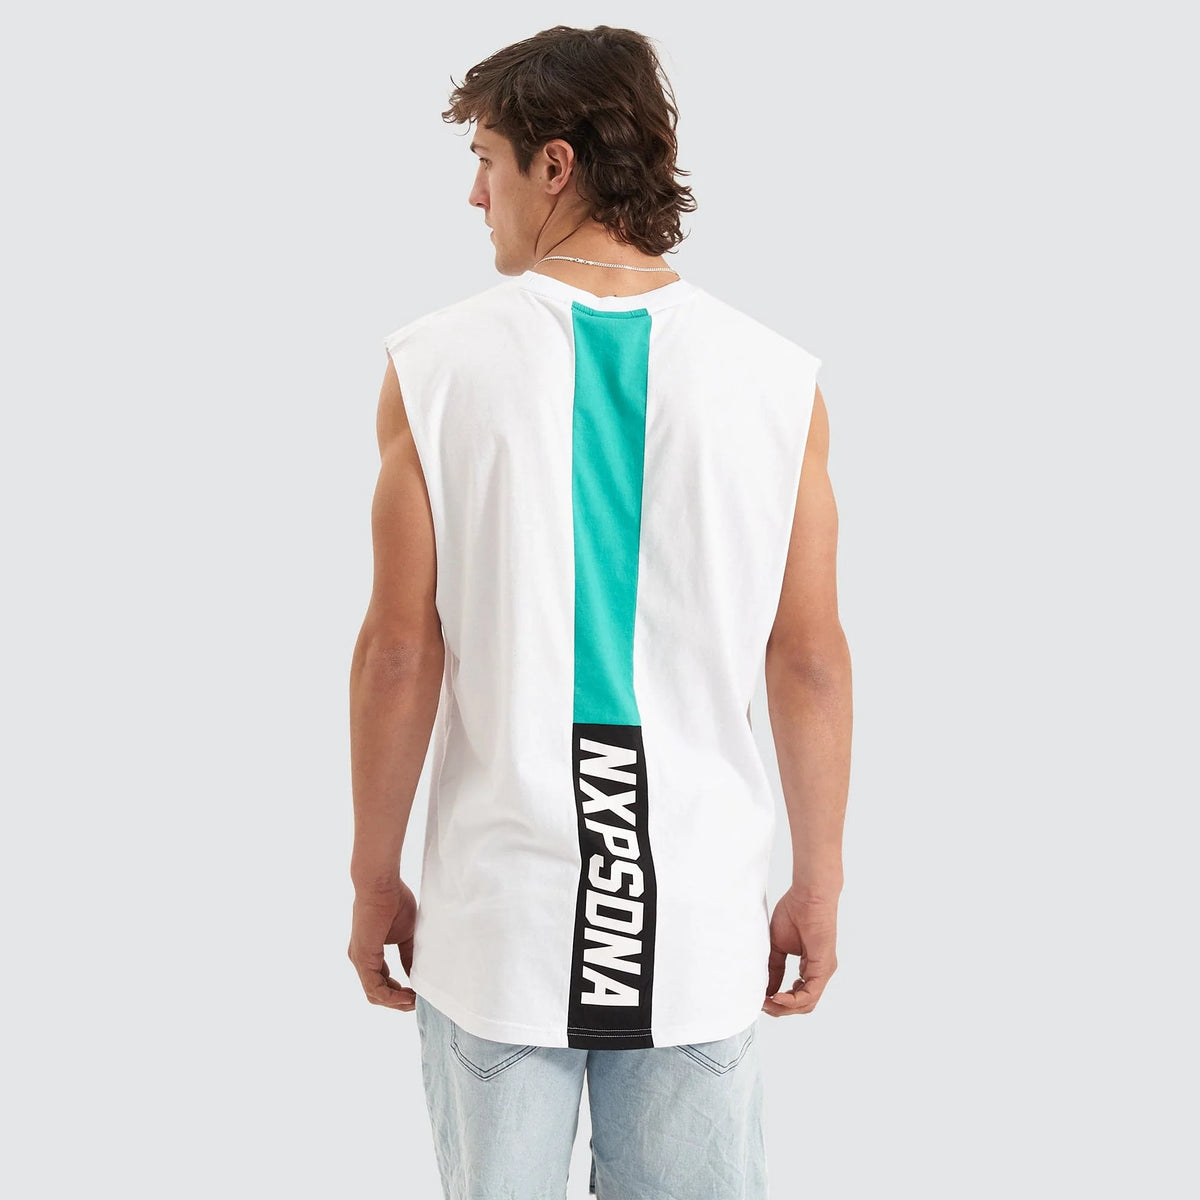 Cautionary Scoop Back Muscle White